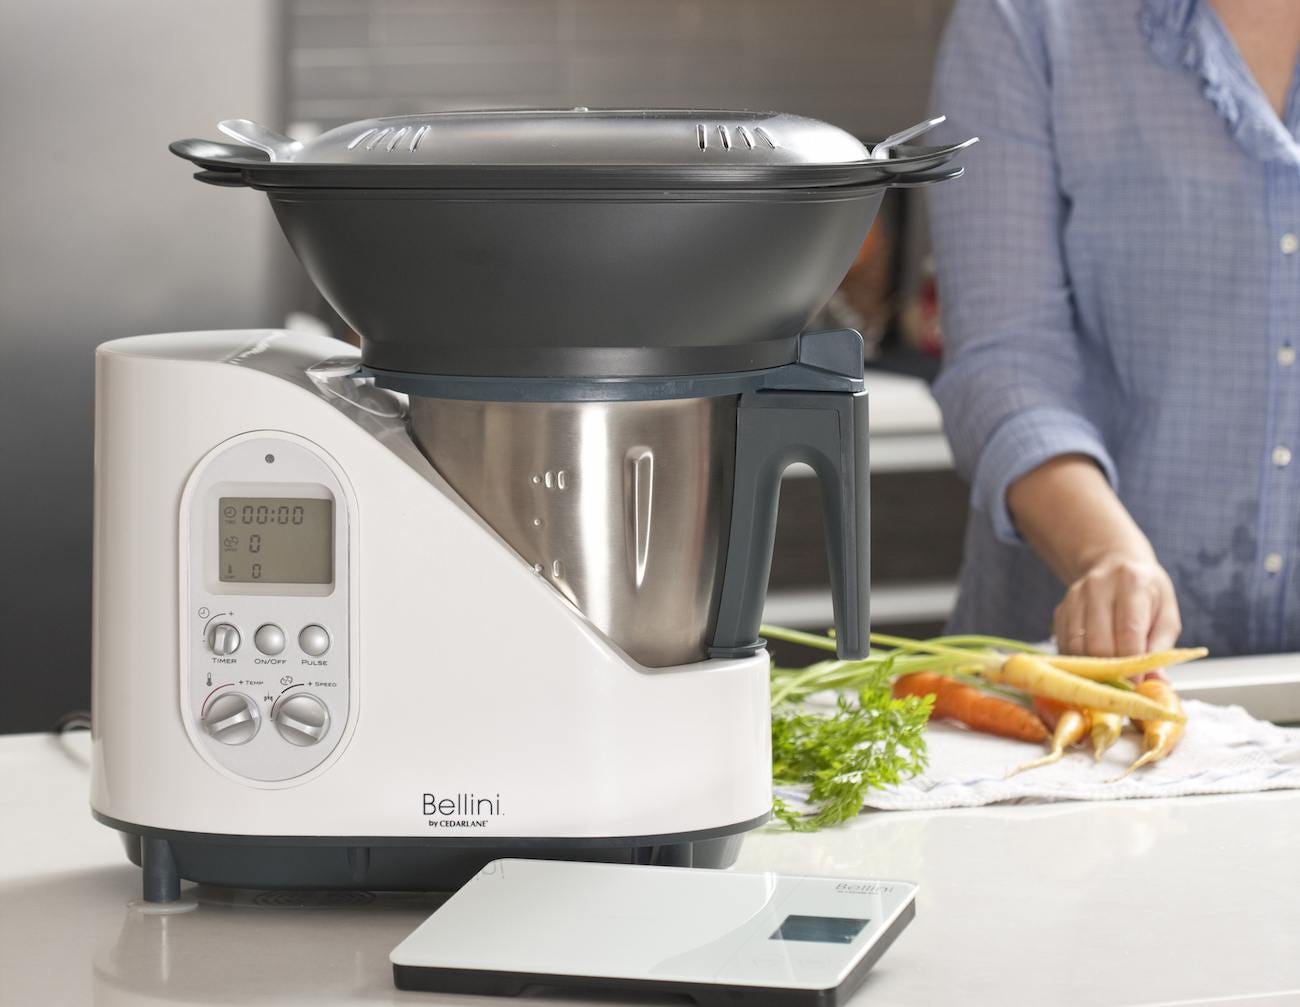 10 Smart kitchen gadgets to save you time and hassle » Gadget Flow